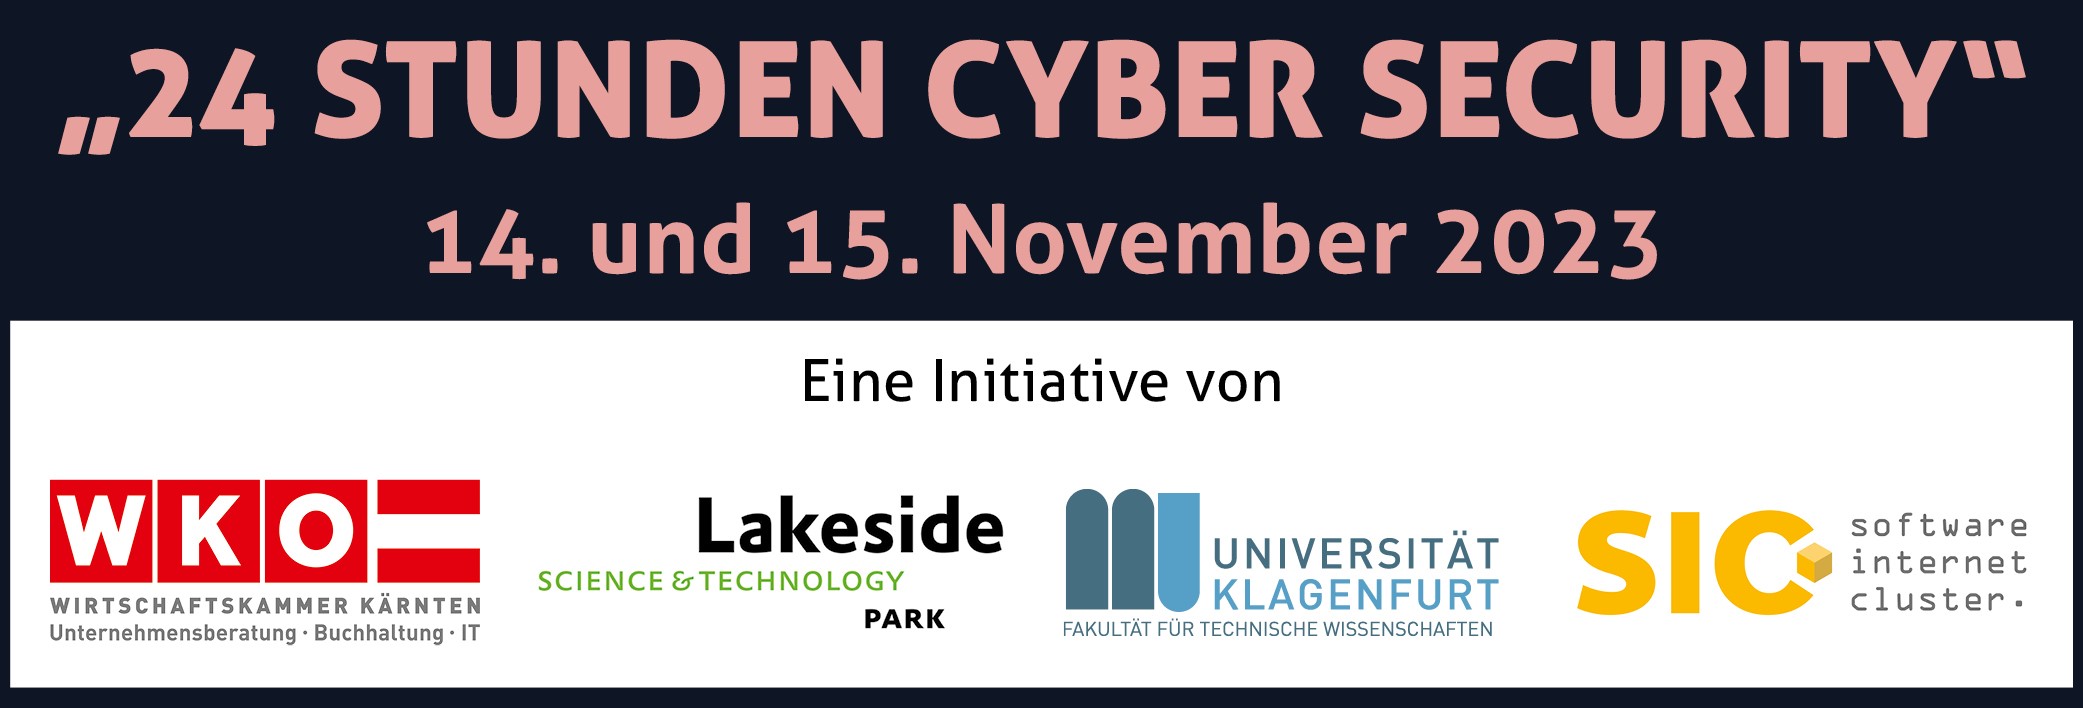 24 Stunden Cyber Security